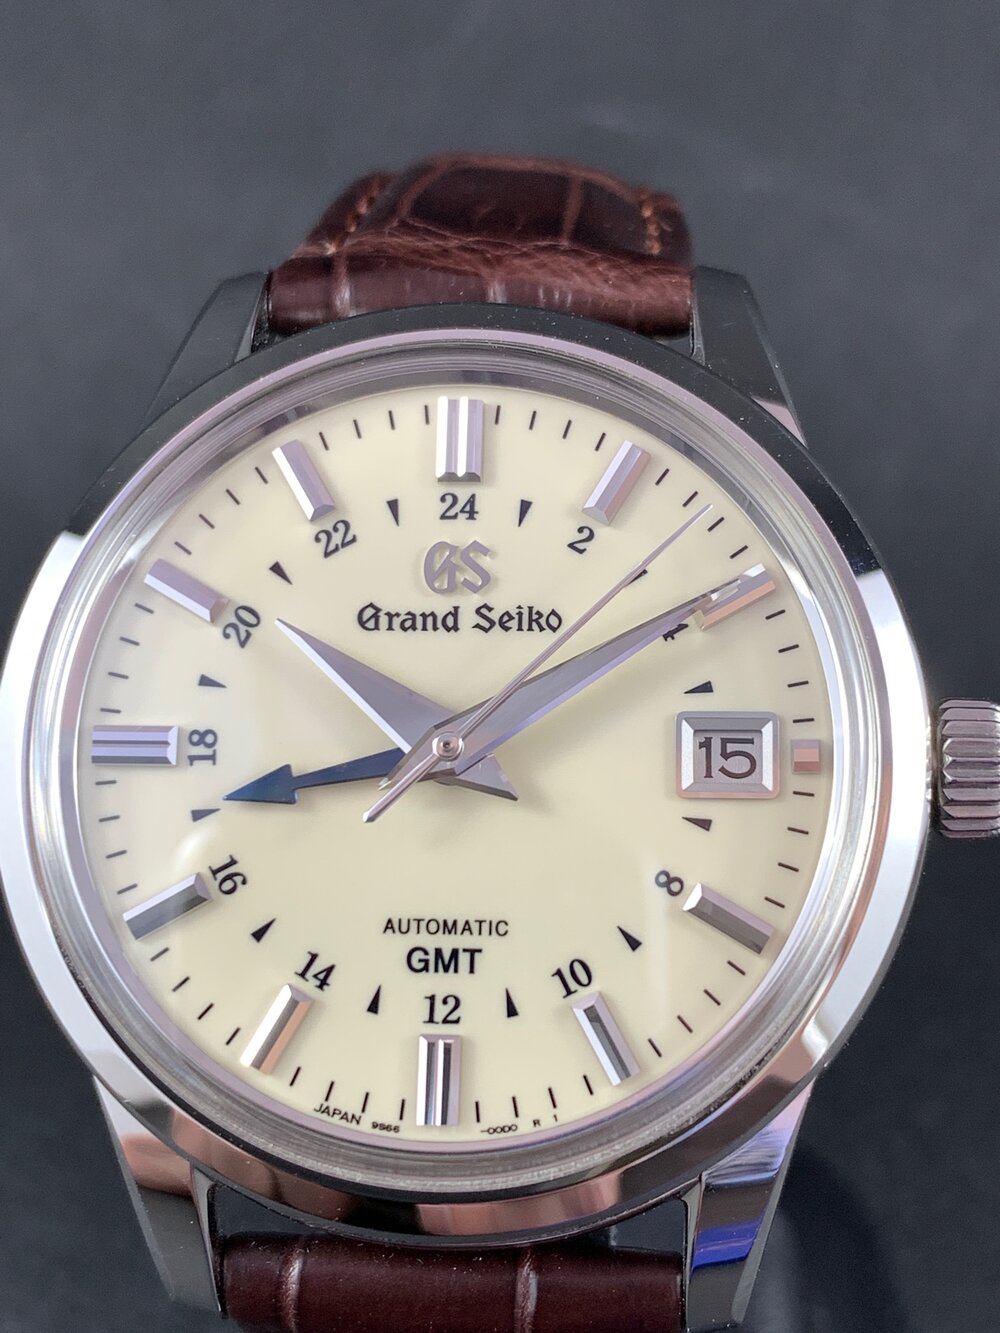 Grand Seiko GMT Automatic. —  Watchmakers